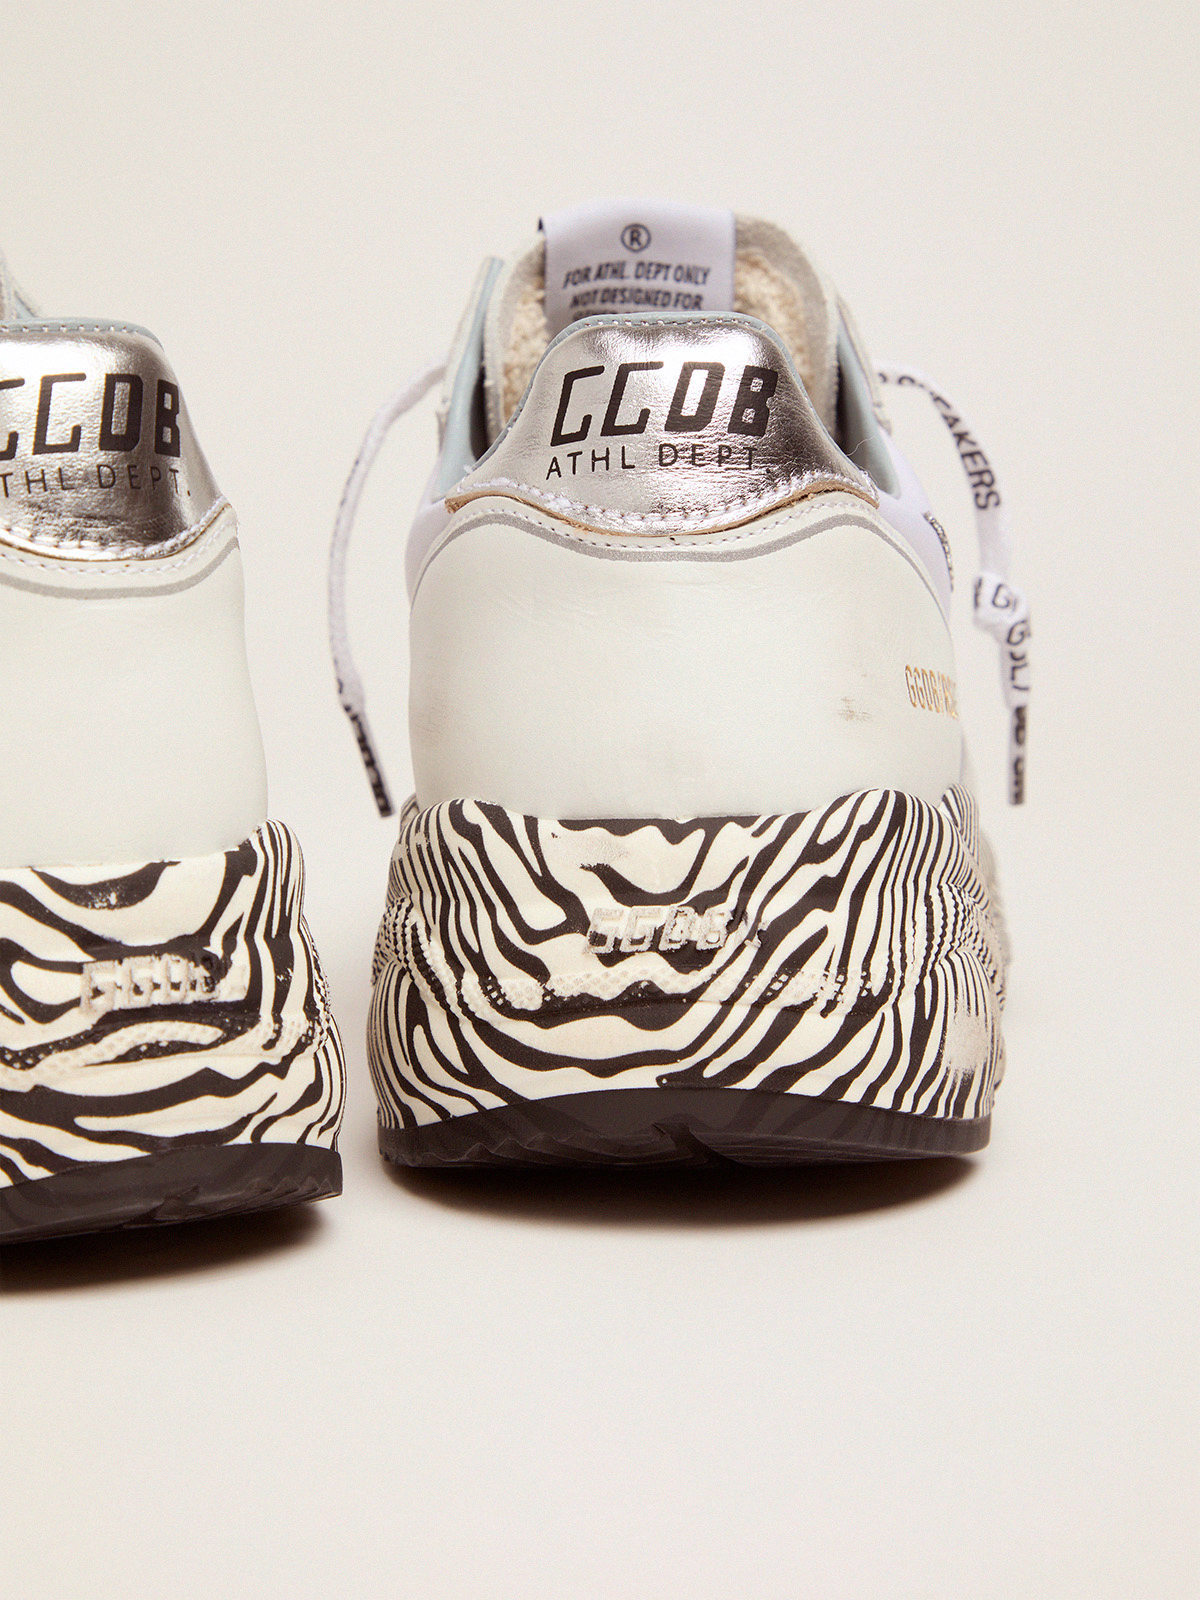 Running Sole sneakers with zebra-print sole and crystals | Golden Goose